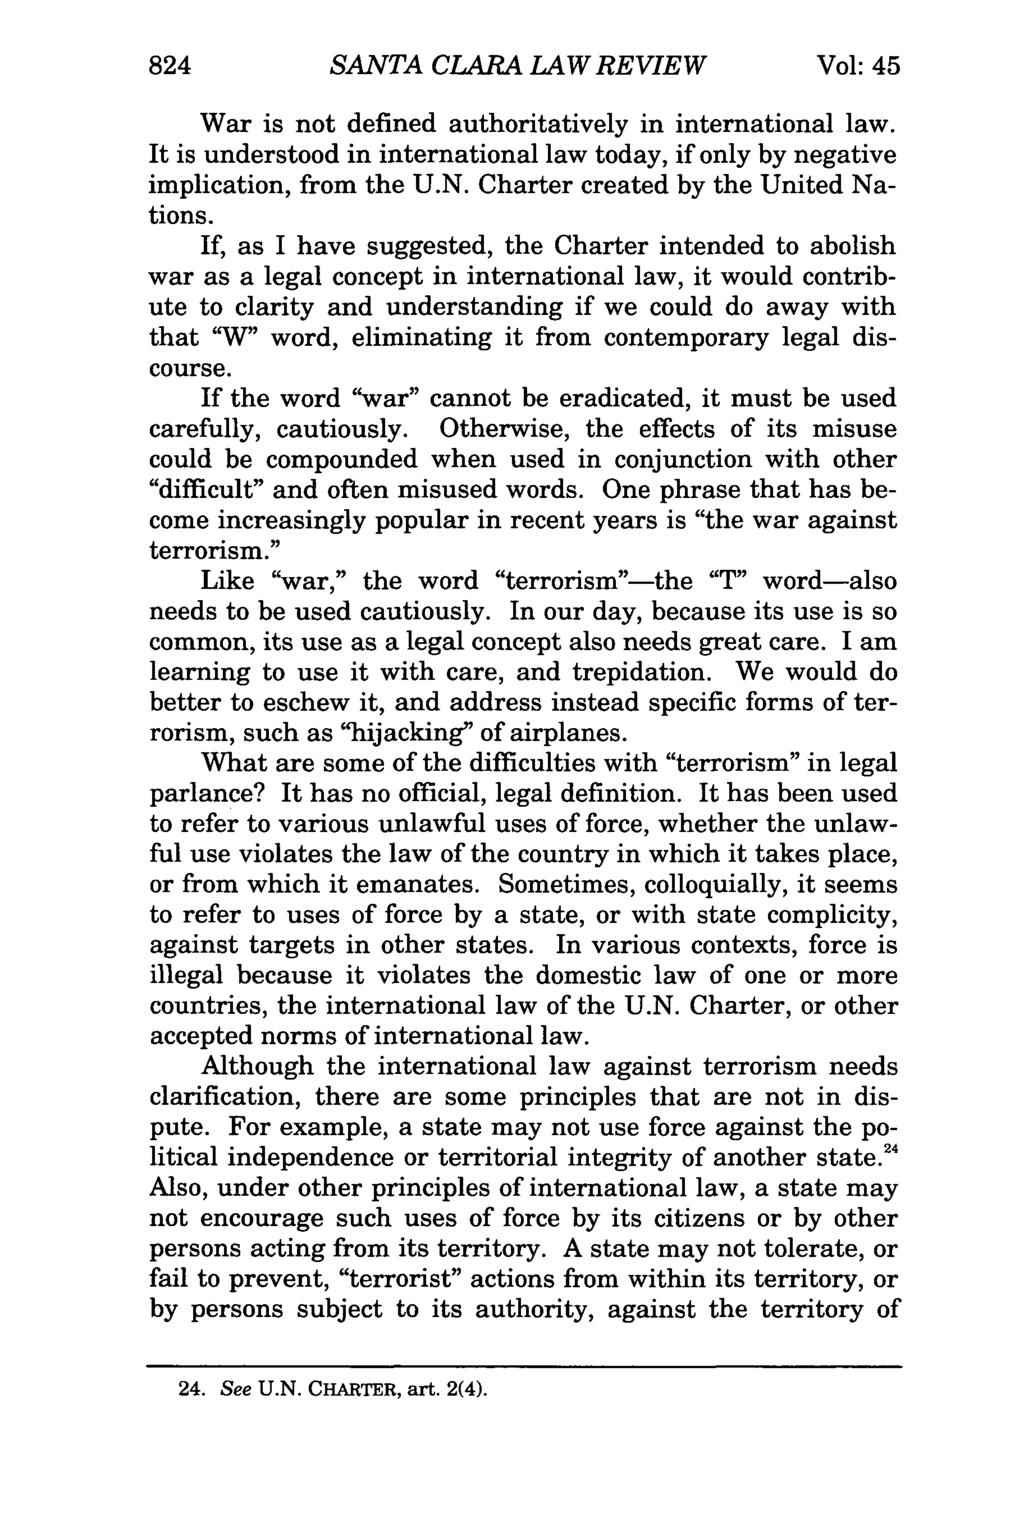 824 SANTA CLARA LAW REVIEW Vol: 45 War is not defined authoritatively in international law. It is understood in international law today, if only by negative implication, from the U.N. Charter created by the United Nations.